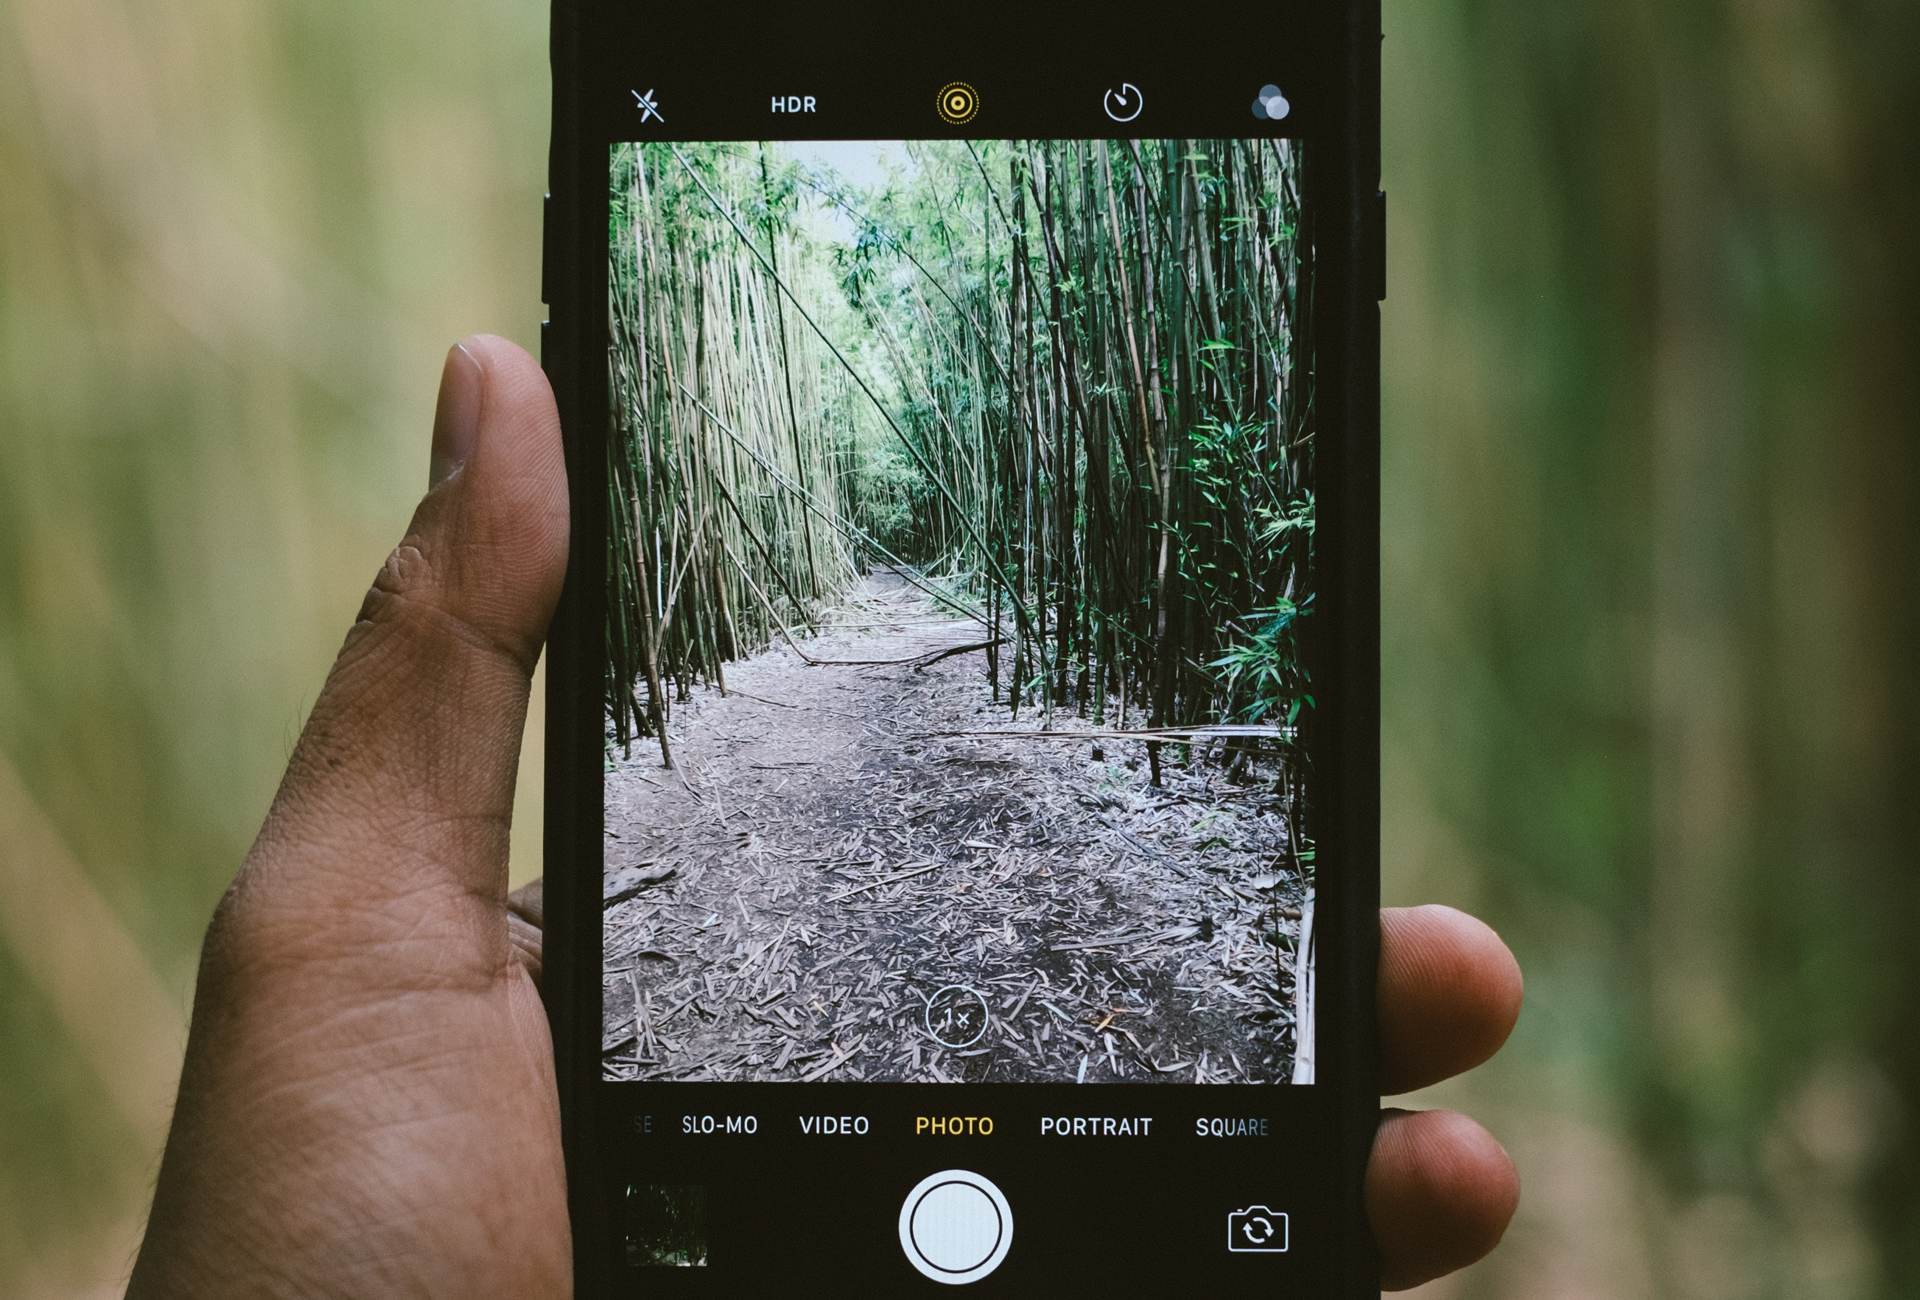 Bamboo forest seen through a mobile phone